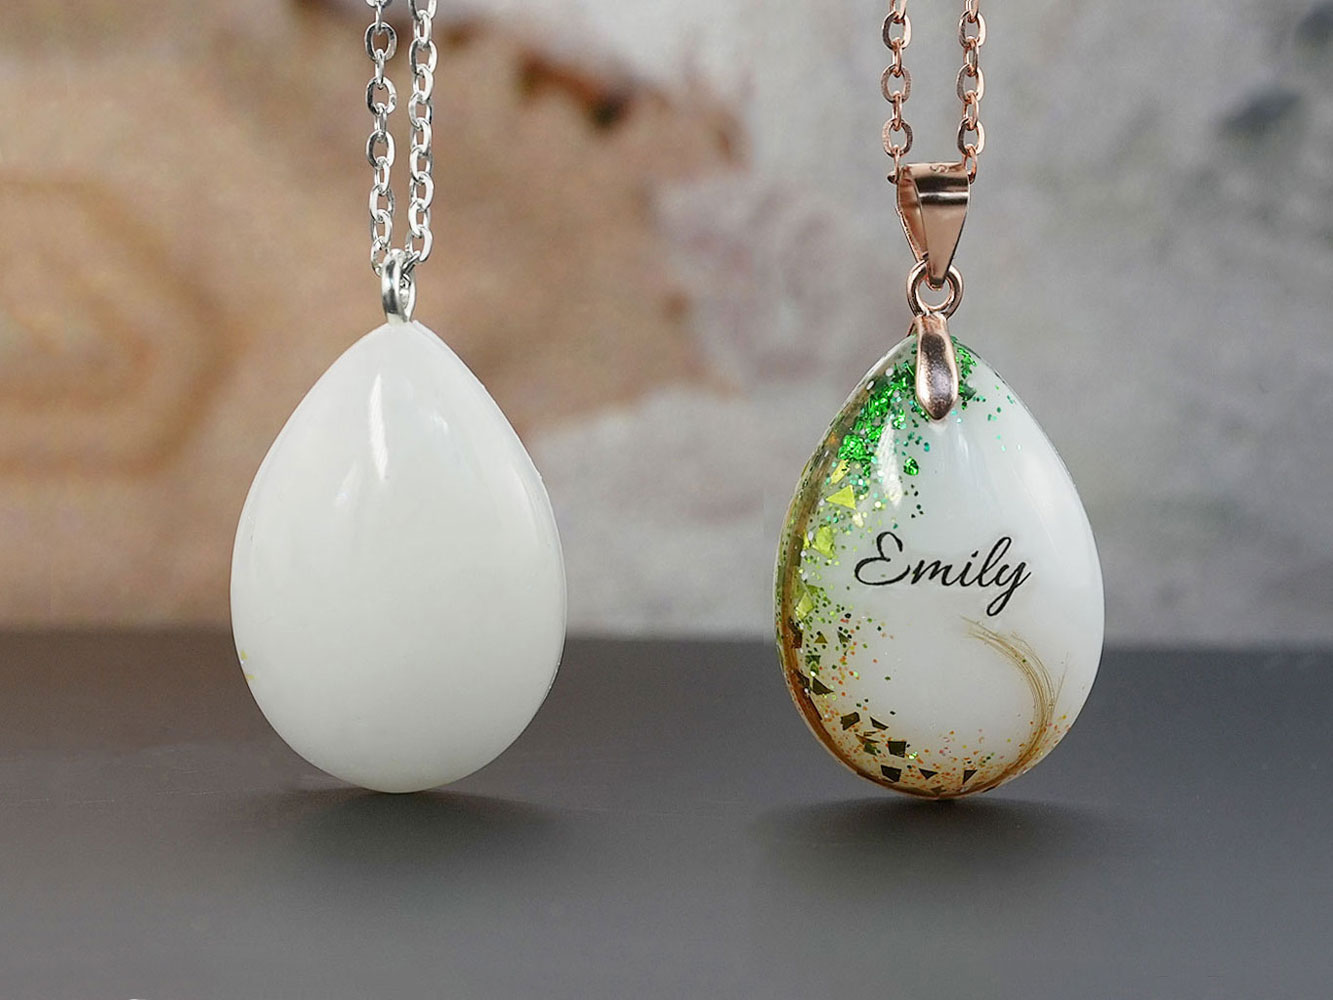 Breast-Milk Jewelry Is Extra Meaningful for Bereaved Parents